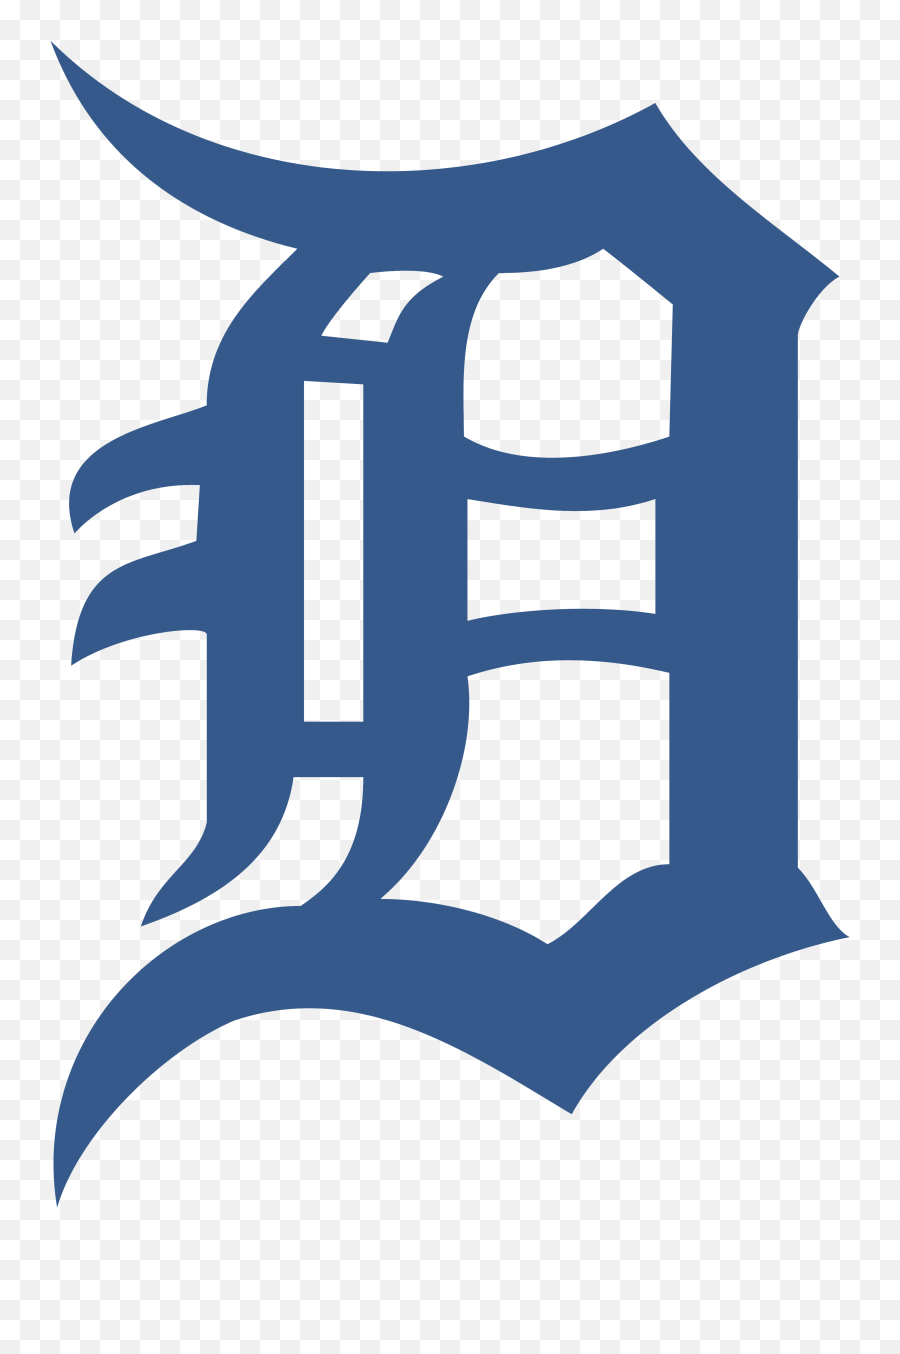 Detroit Tigers Logo And Symbol Meaning - Pink Detroit Tigers Logo Emoji,Tigers Logo